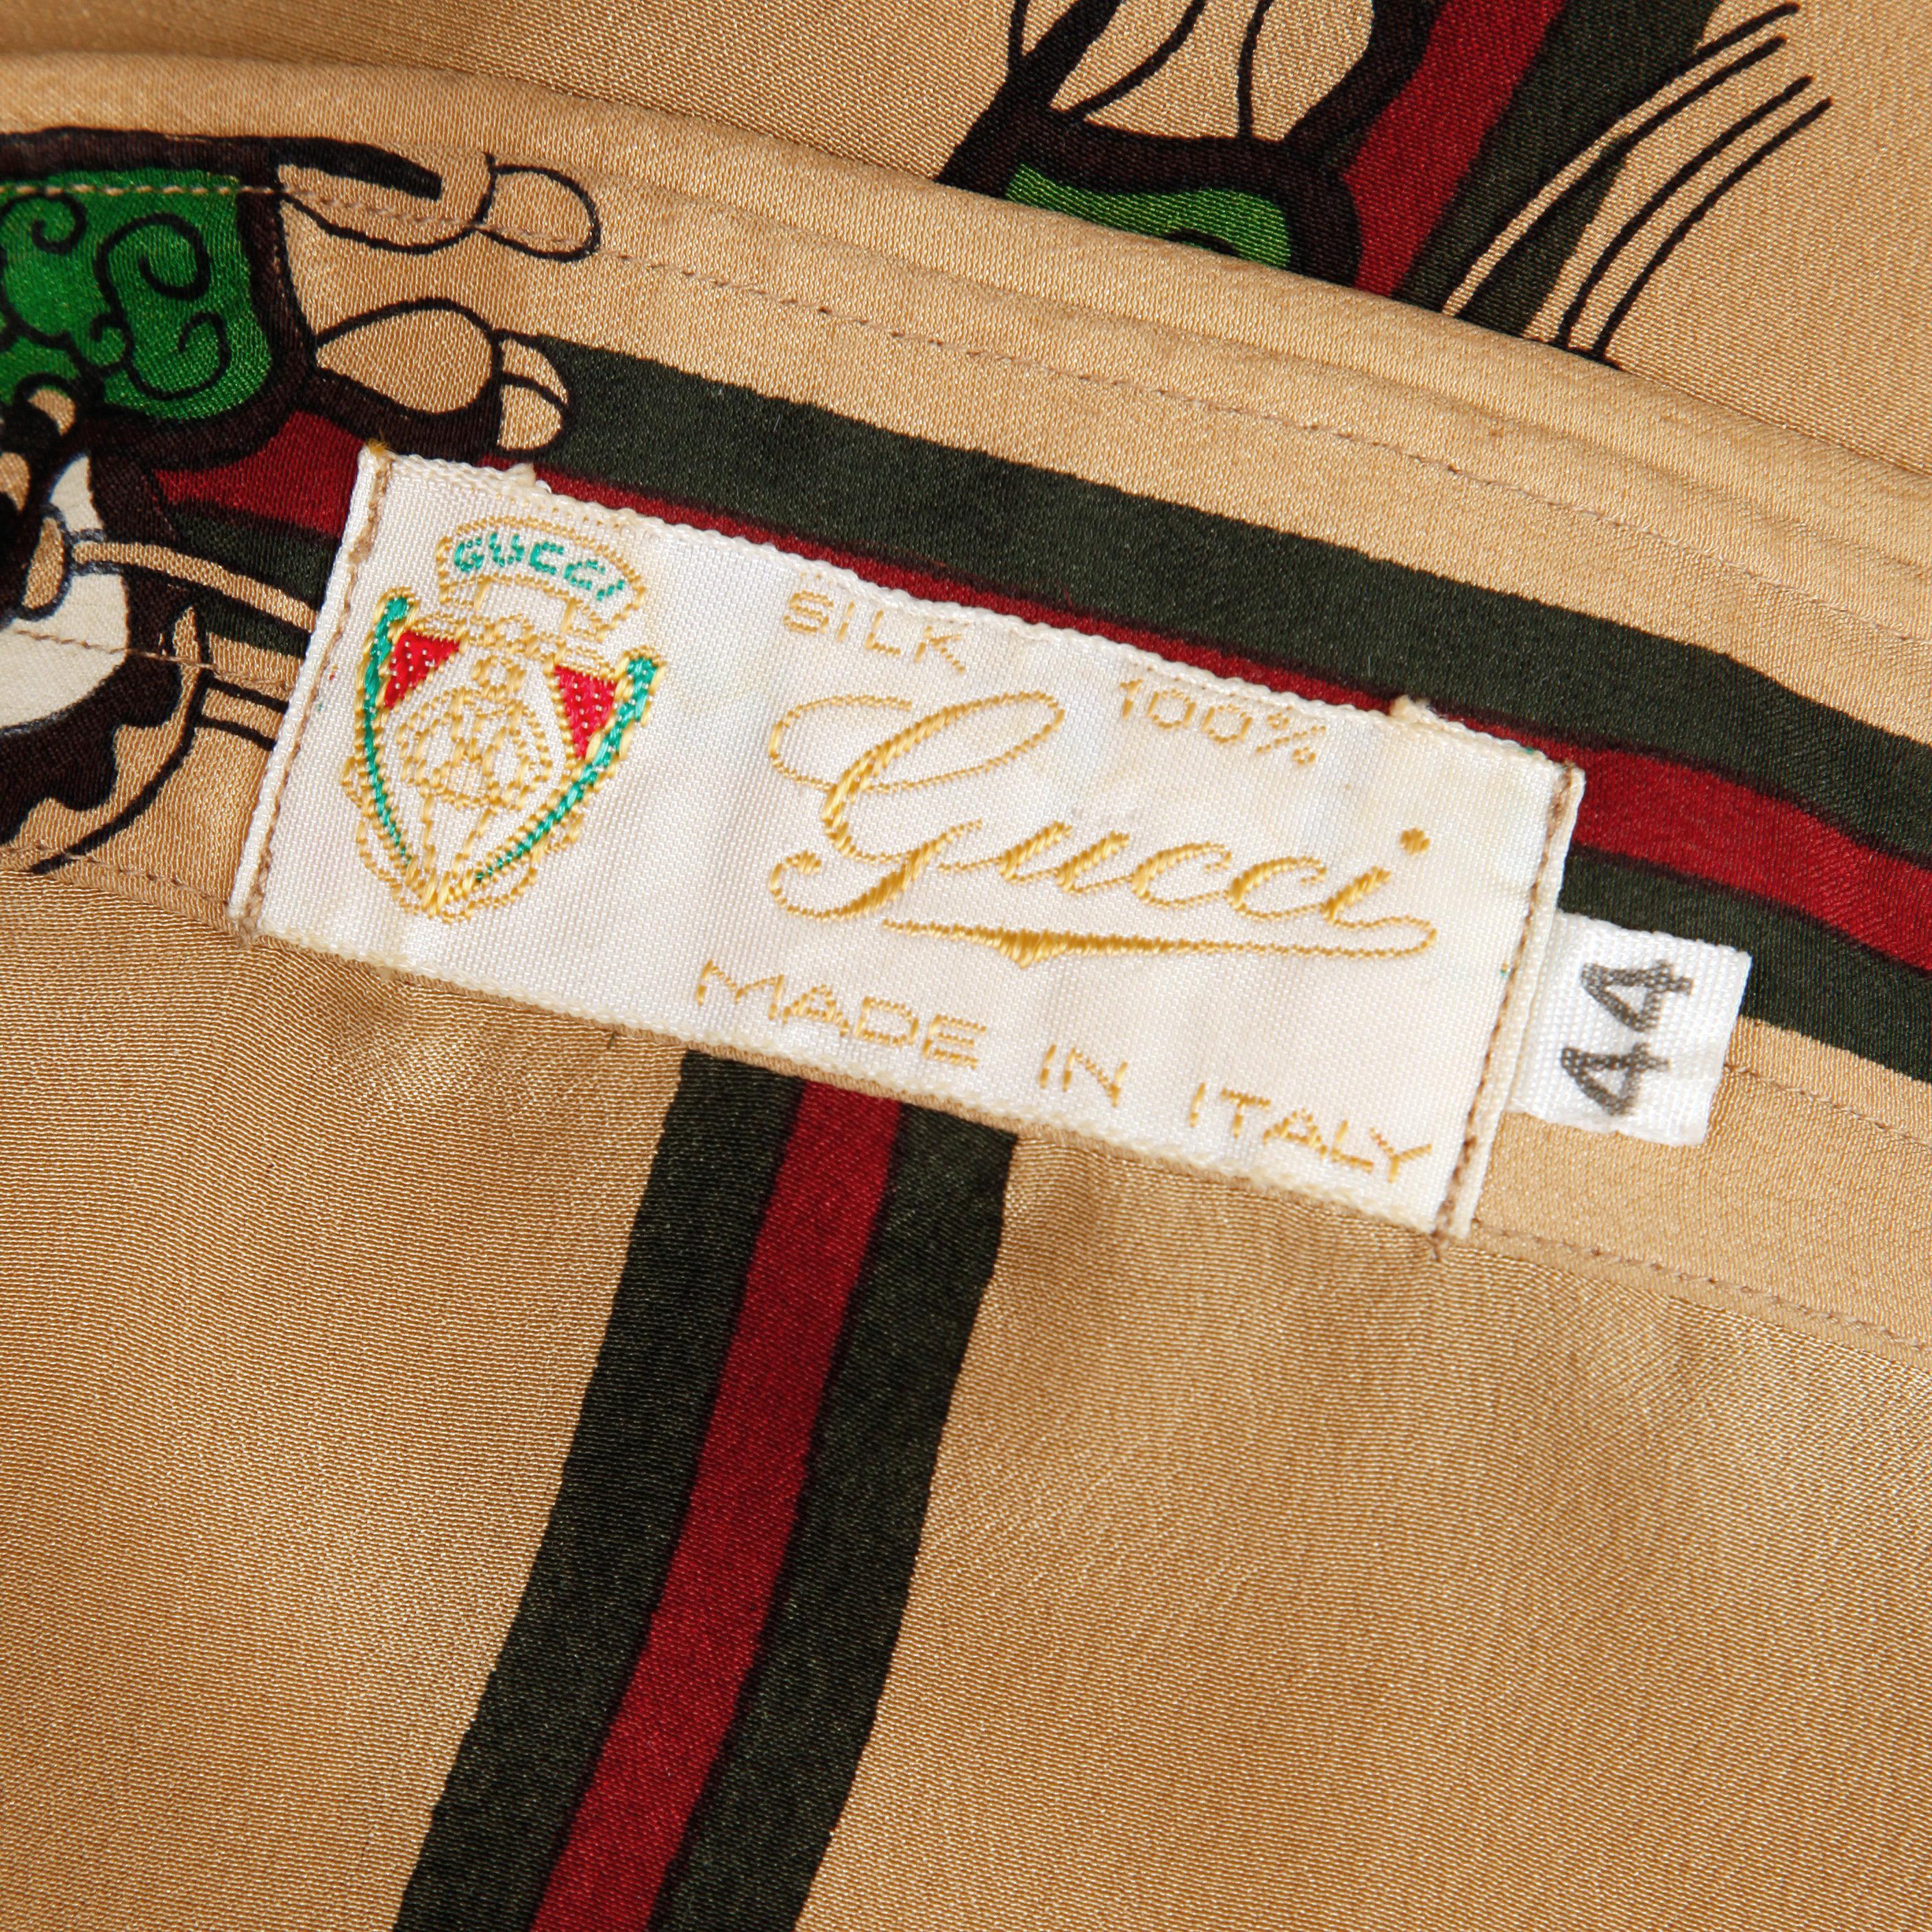 Rare 1970s vintage Gucci blouse with an equestrian-inspired print which features a saddle and the iconic red and green Gucci stripe. From the estate of Pamela Lewis (Jerry Lewis/ Gary Lewis). Covered buttons with metallic 